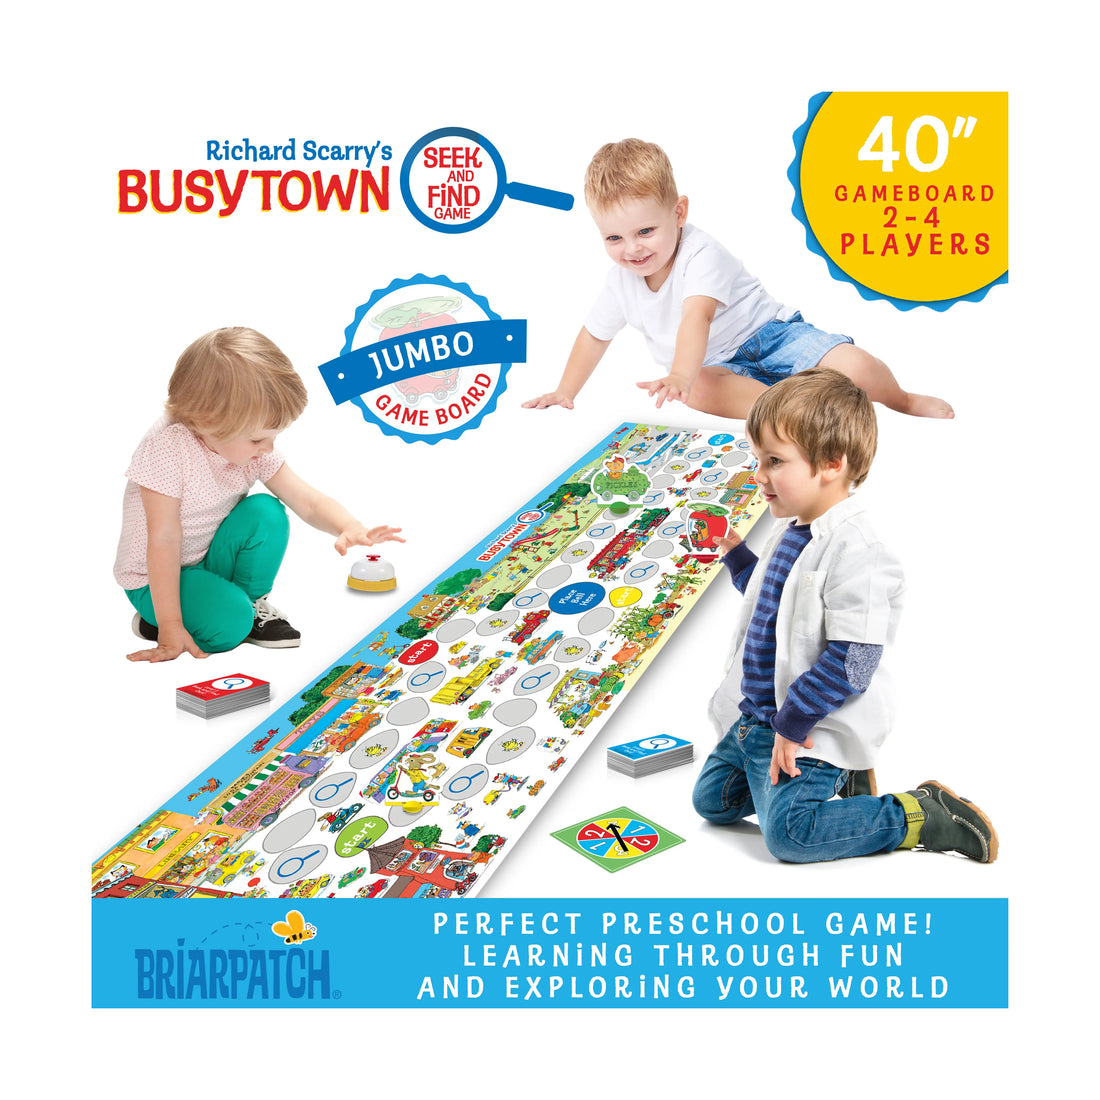 Richard Scarry's Busytown: Seek & Find Game Preview #4